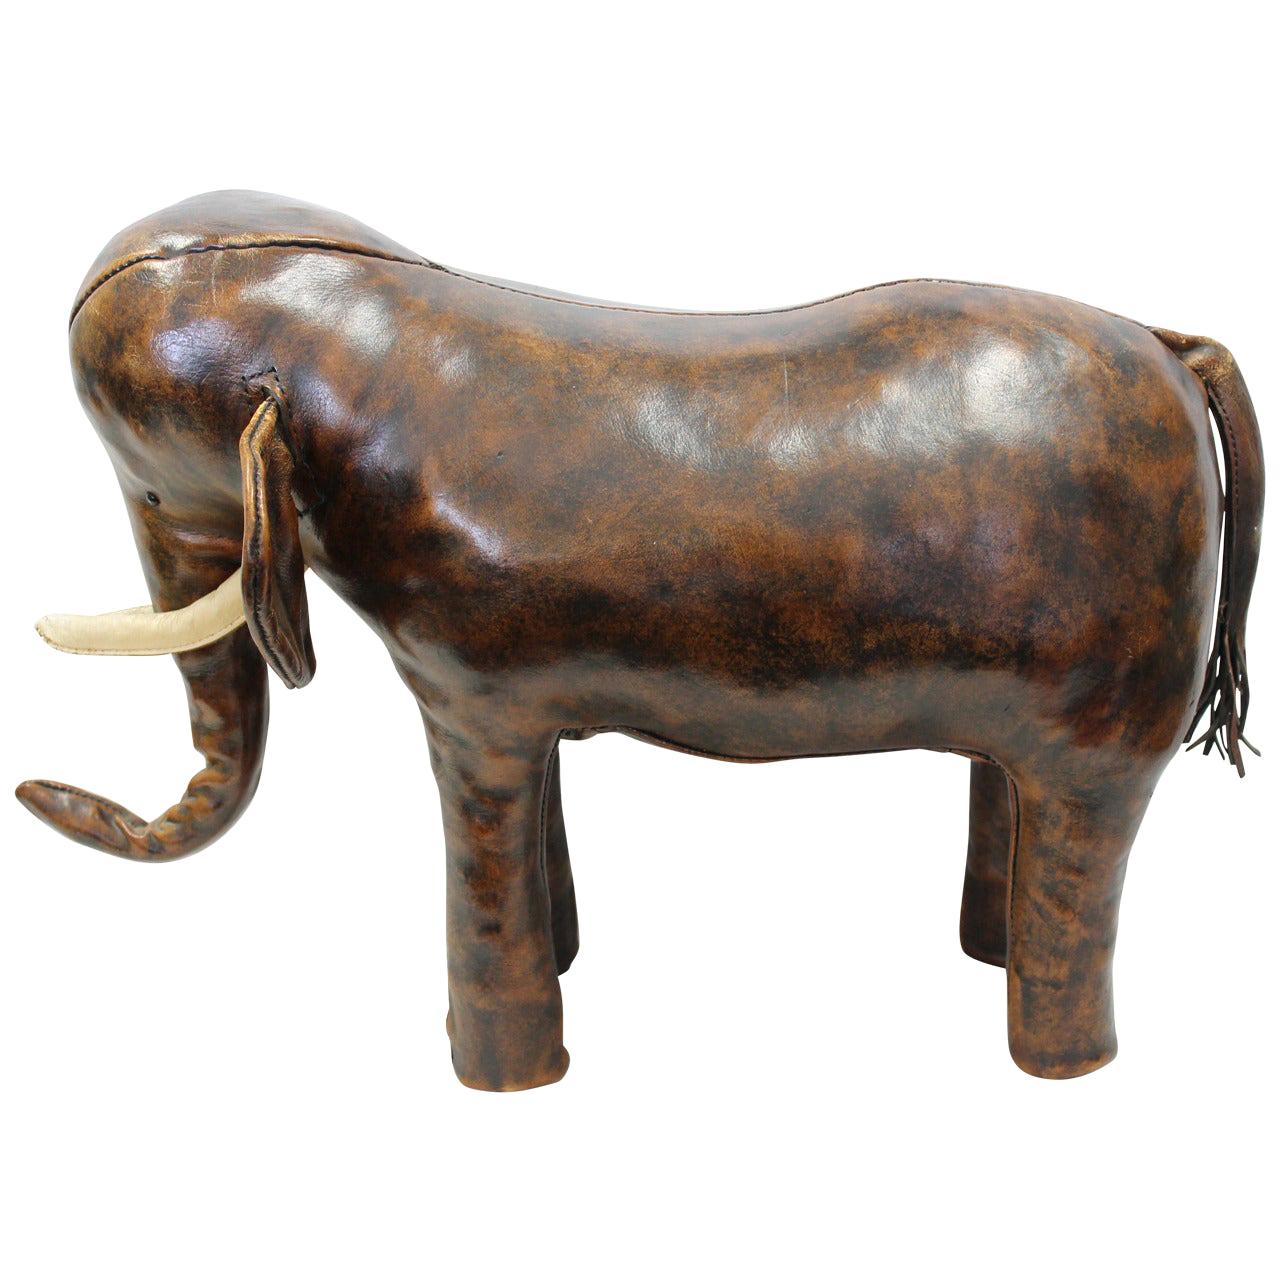 Dimitri Omersa for Saks Fifth Avenue Leather Elephant Footstool